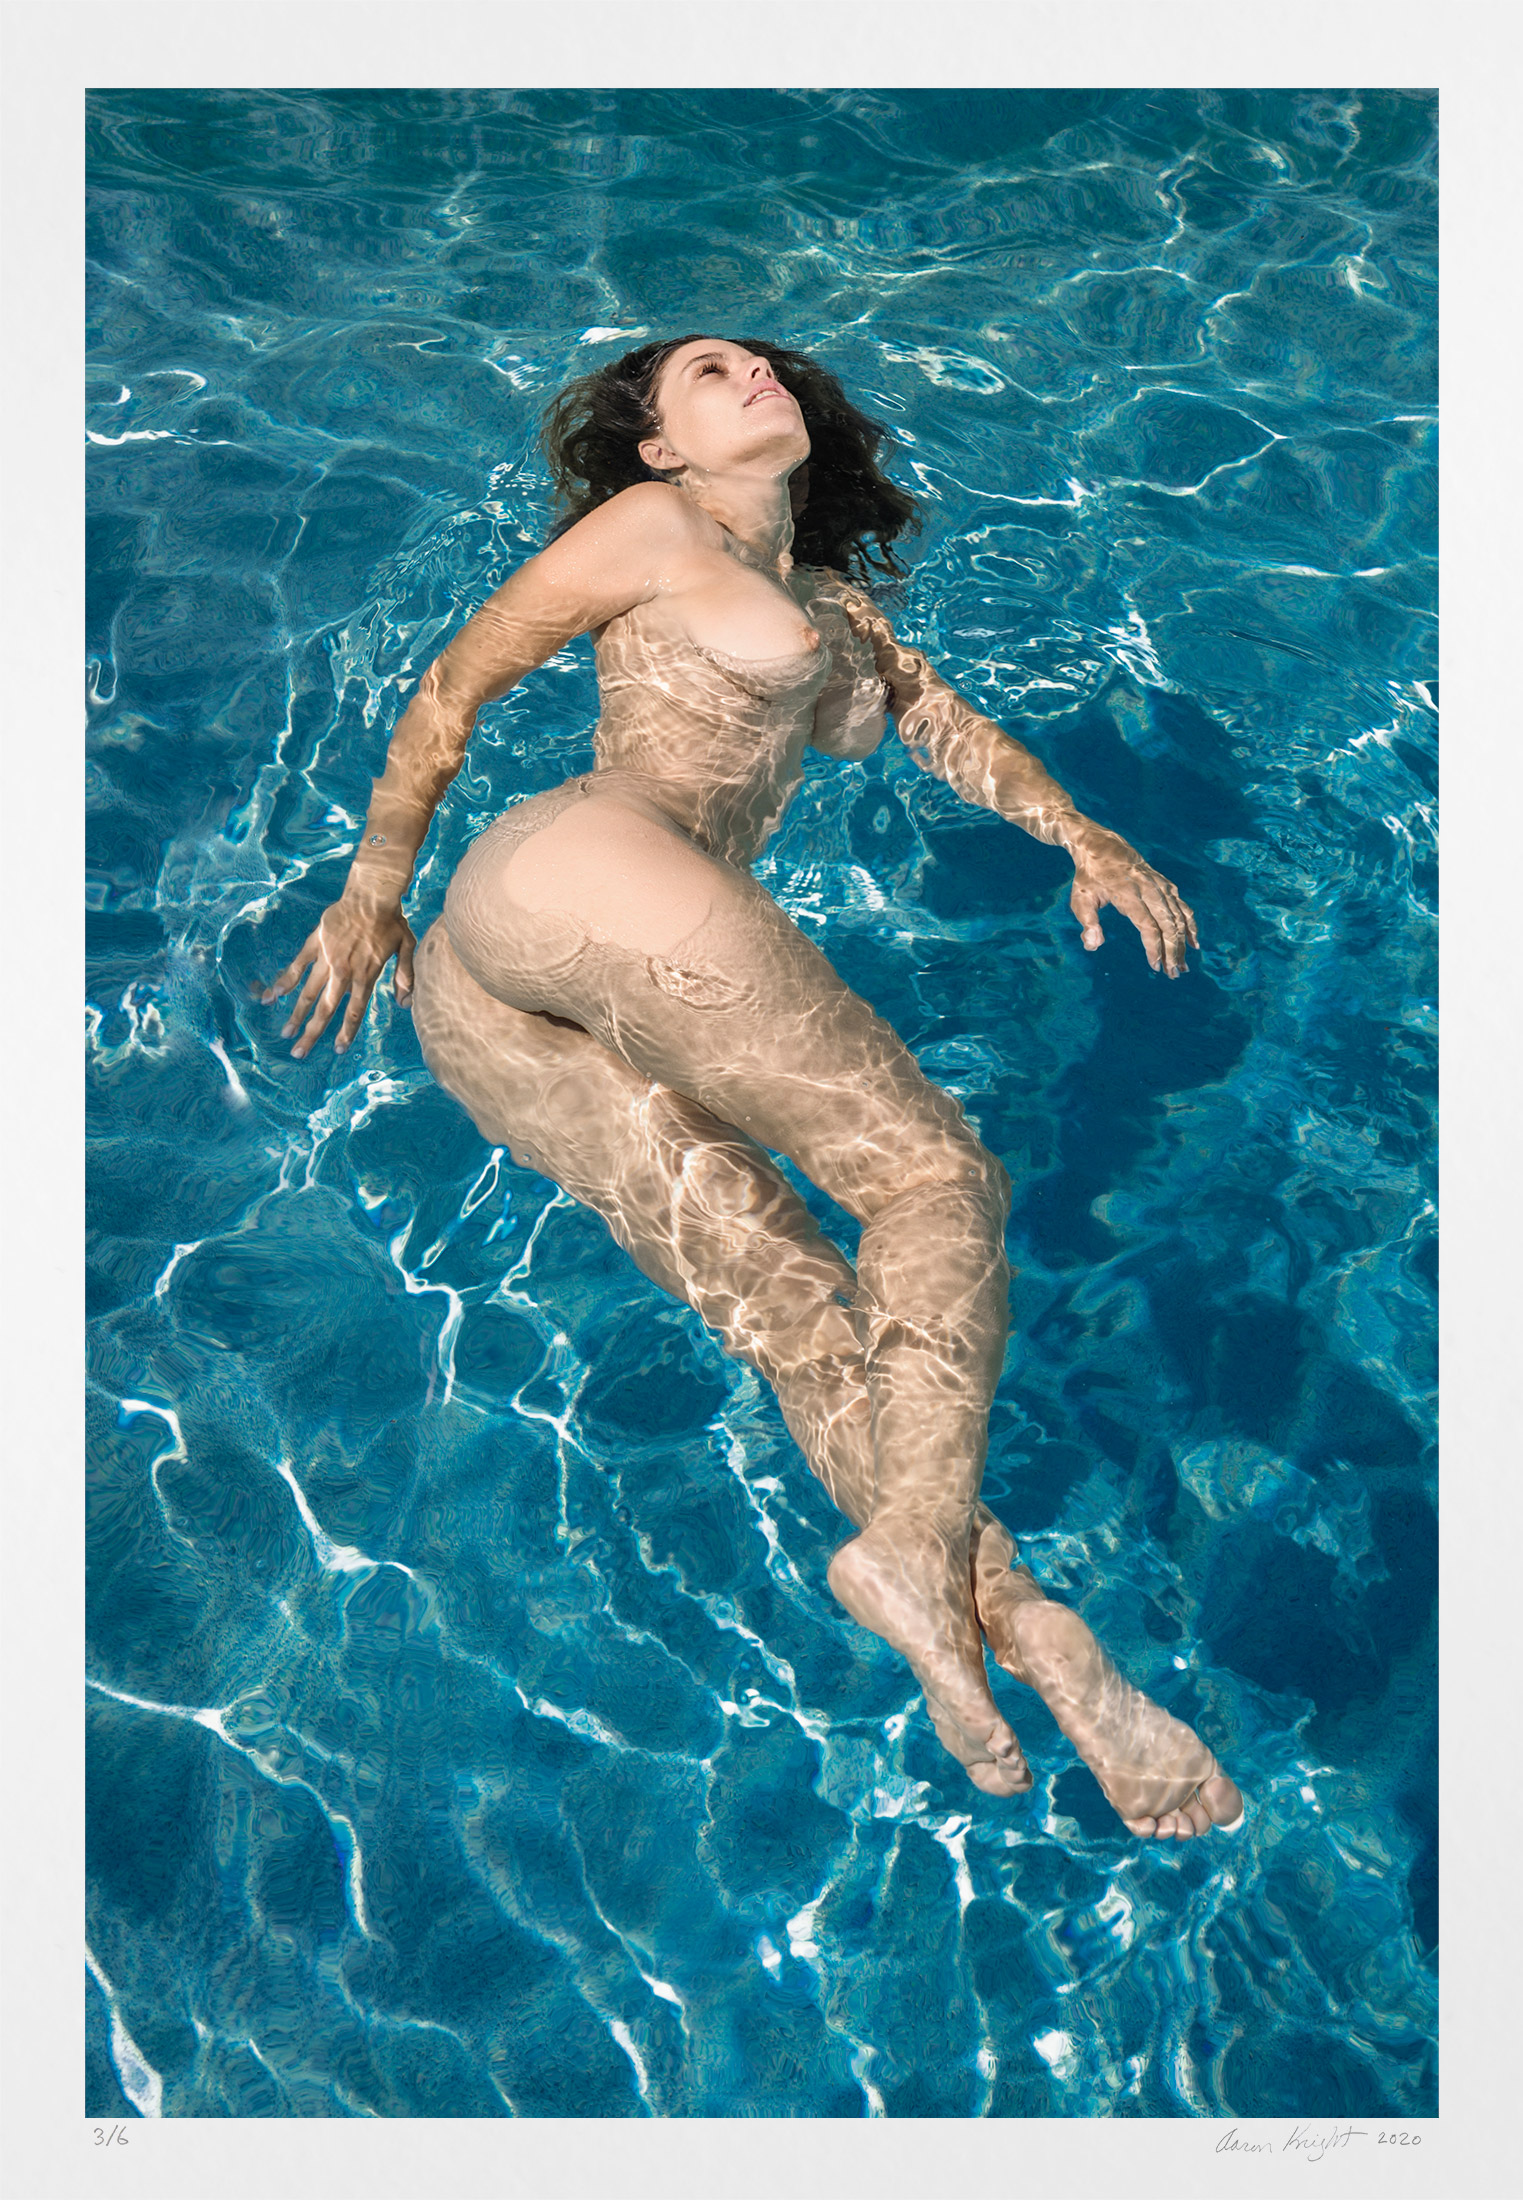 Artistic erotic photography: limited edition swimming nude woman